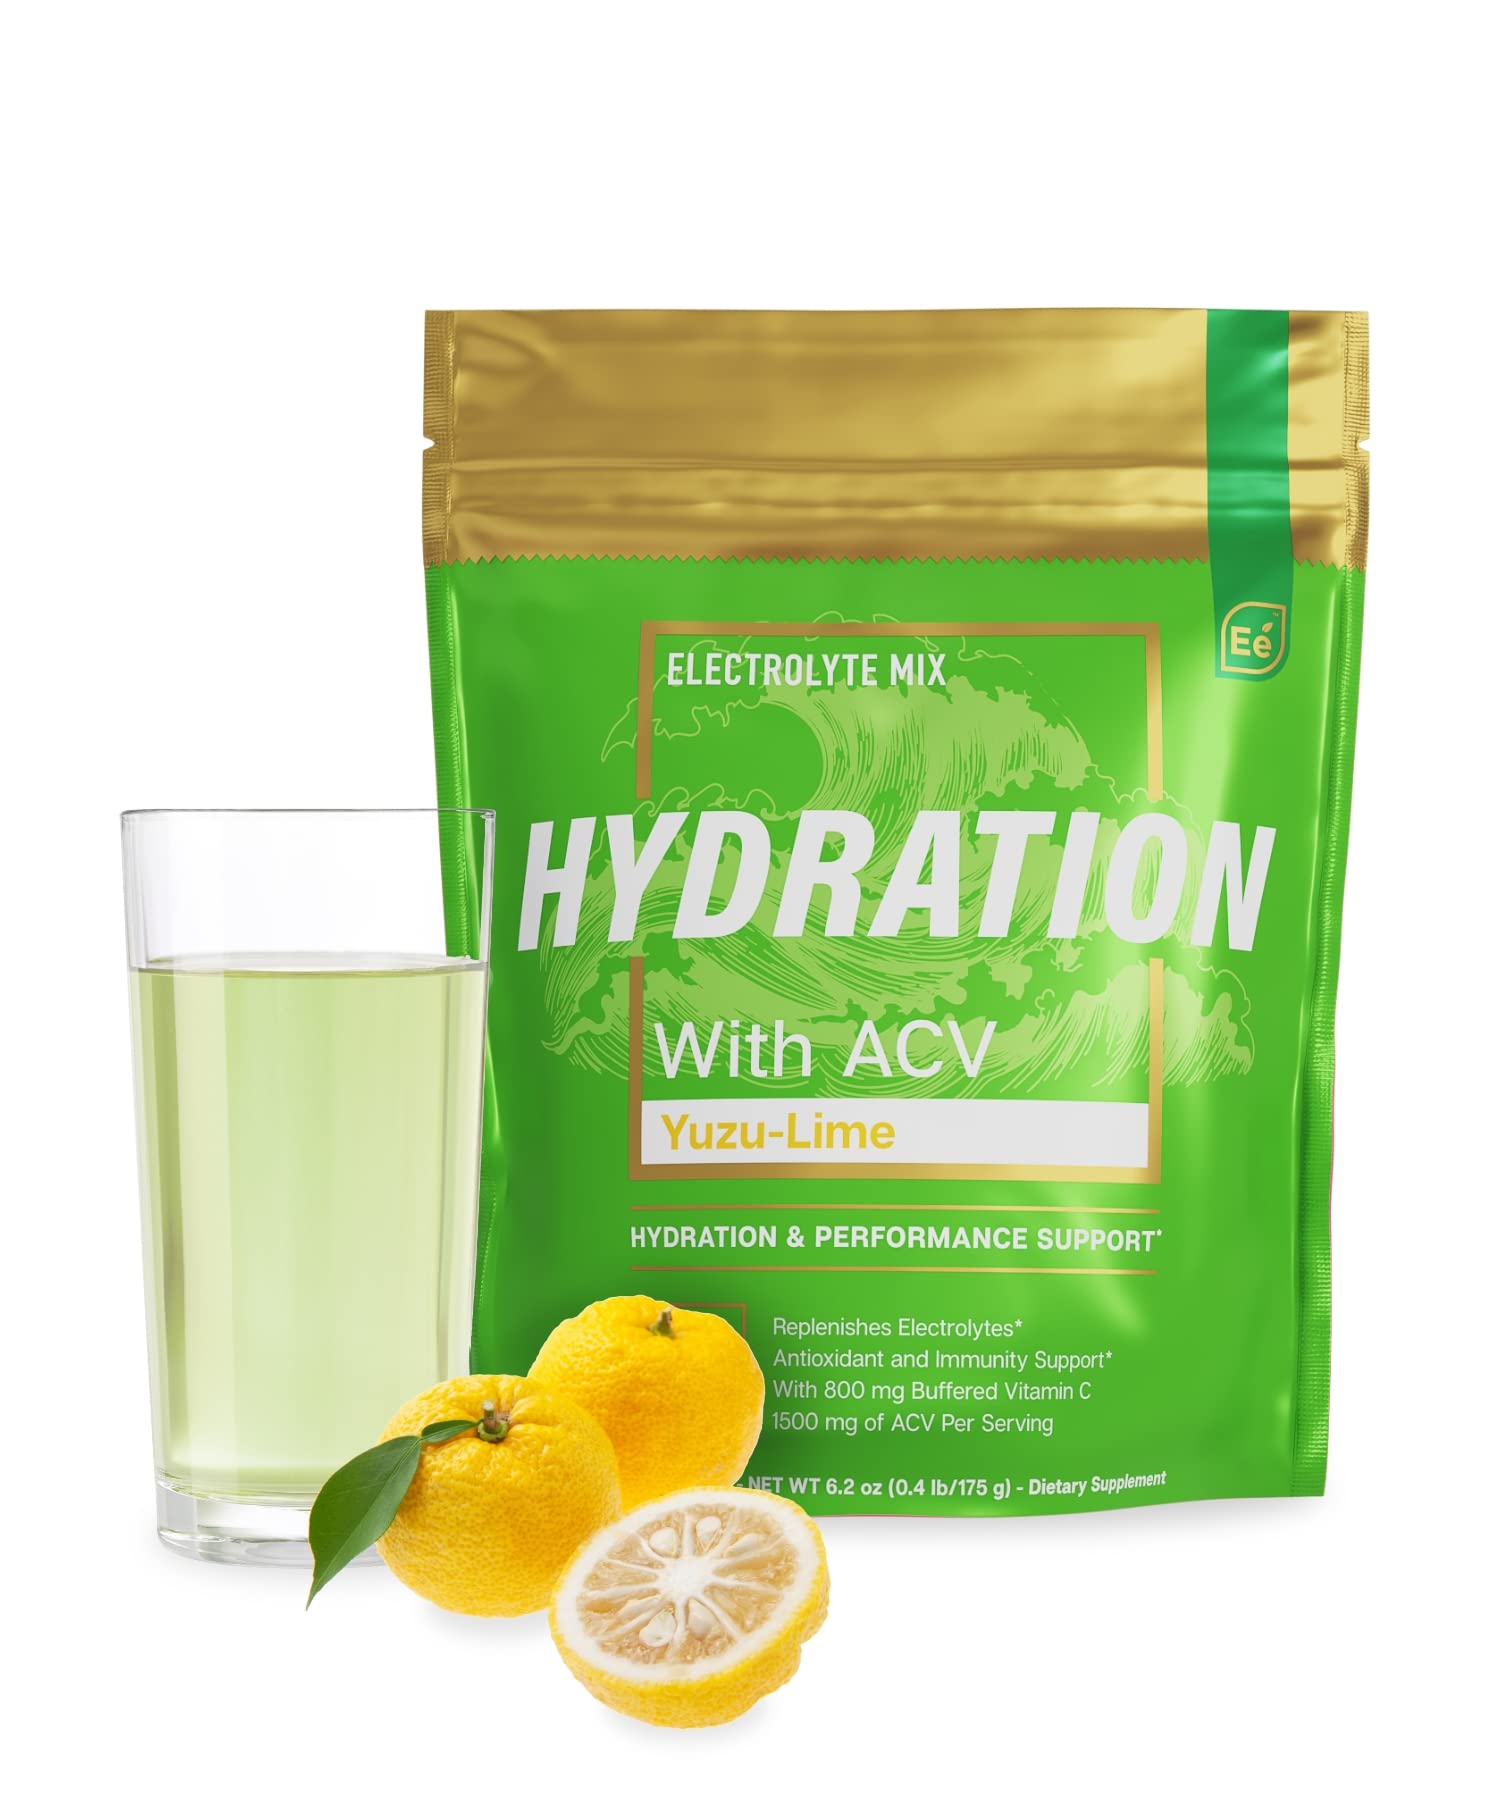 Hydration Powder Packets - Yuzu Lime Flavor | Sugar Free Electrolyte Drink Mix | with ACV & Vitamin C | 25 Stick Packs - by Essential elements